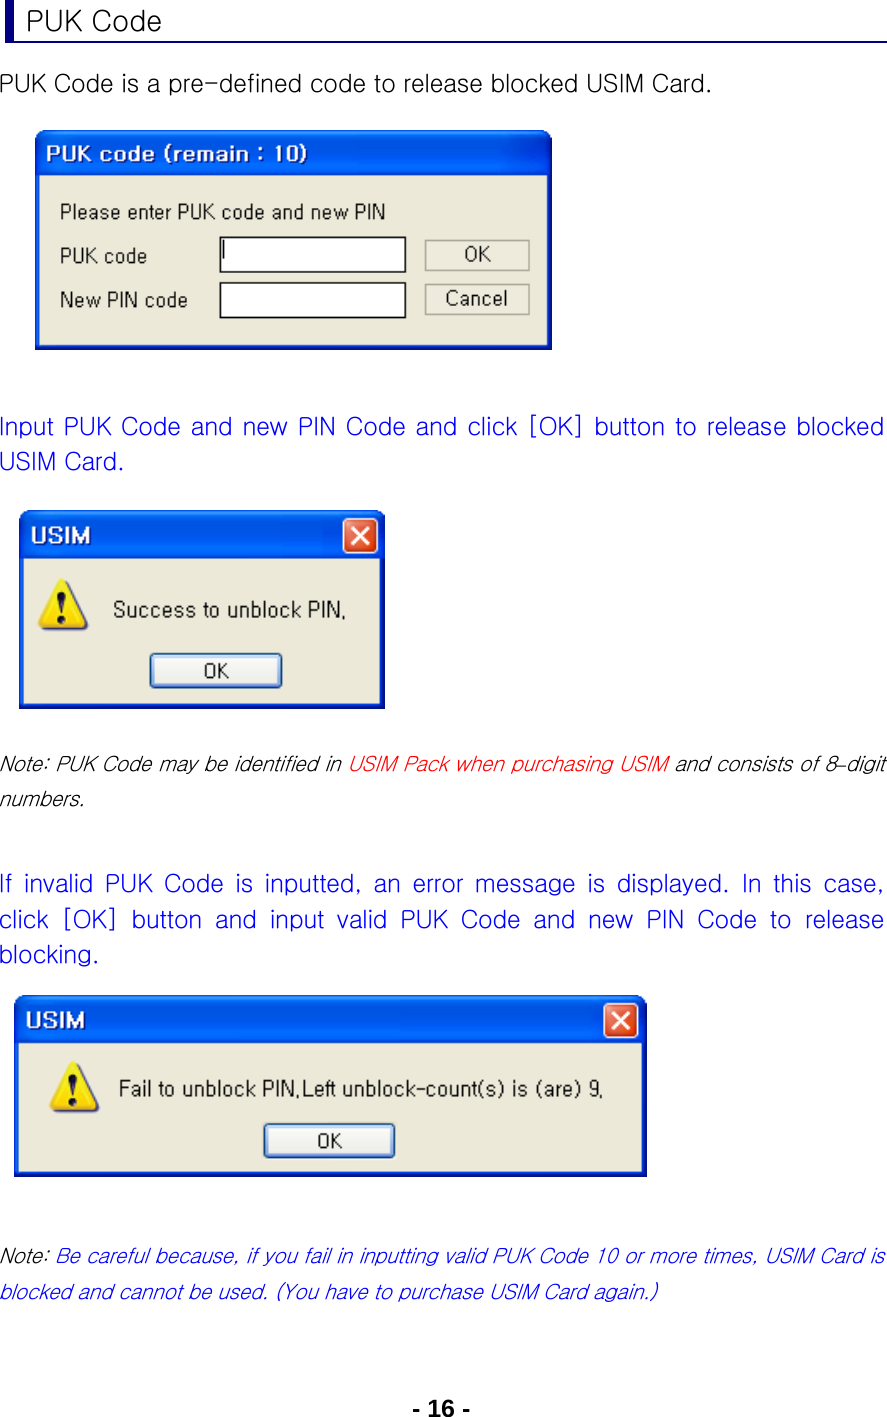 - 16 - PUK Code PUK Code is a pre-defined code to release blocked USIM Card.          Input PUK Code and new PIN Code and click [OK] button to release blocked USIM Card.           Note: PUK Code may be identified in USIM Pack when purchasing USIM and consists of 8–digit numbers.  If  invalid  PUK  Code  is  inputted,  an  error  message  is  displayed. In this case, click  [OK]  button  and  input  valid  PUK  Code  and  new  PIN  Code  to  release blocking.       Note: Be careful because, if you fail in inputting valid PUK Code 10 or more times, USIM Card is blocked and cannot be used. (You have to purchase USIM Card again.)  